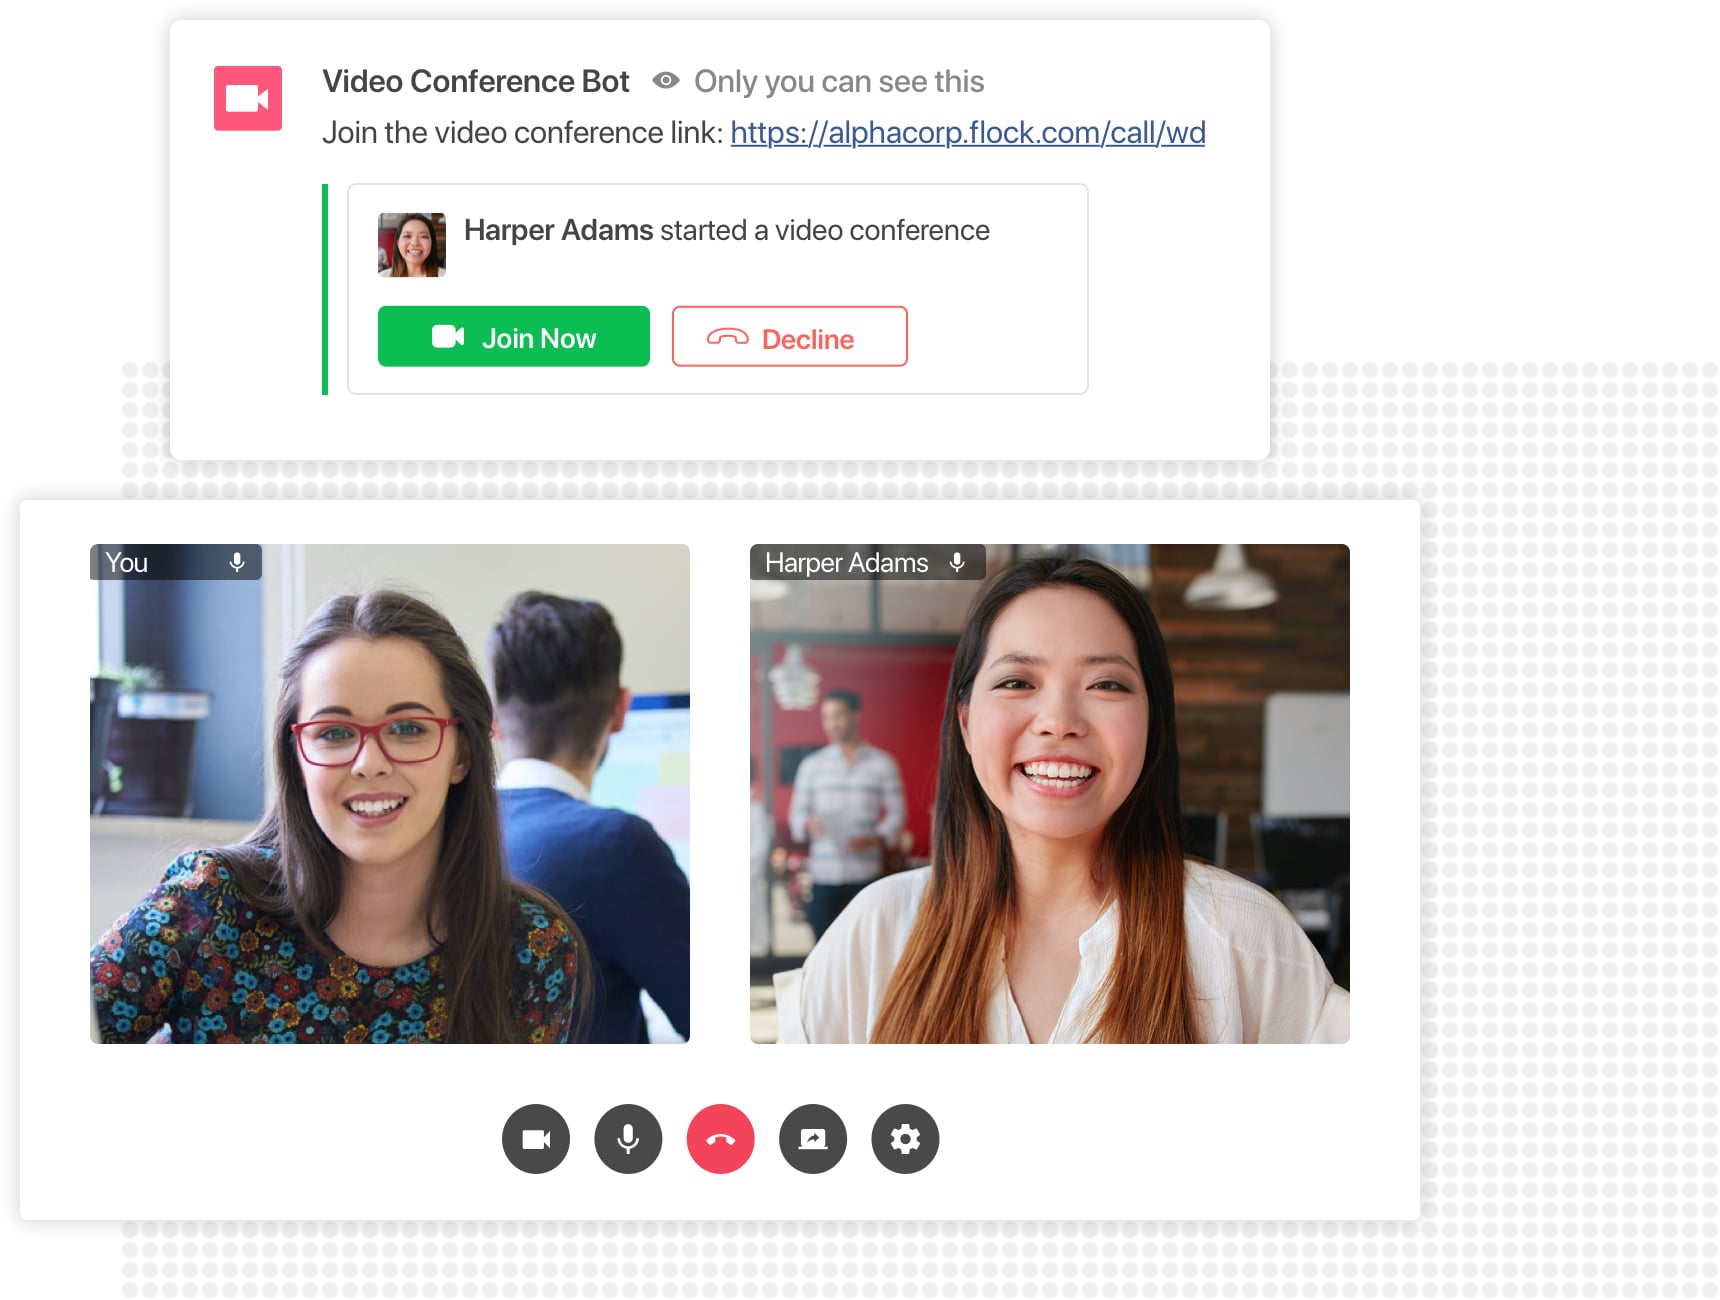 Two female users on Flock's video conferencing tool